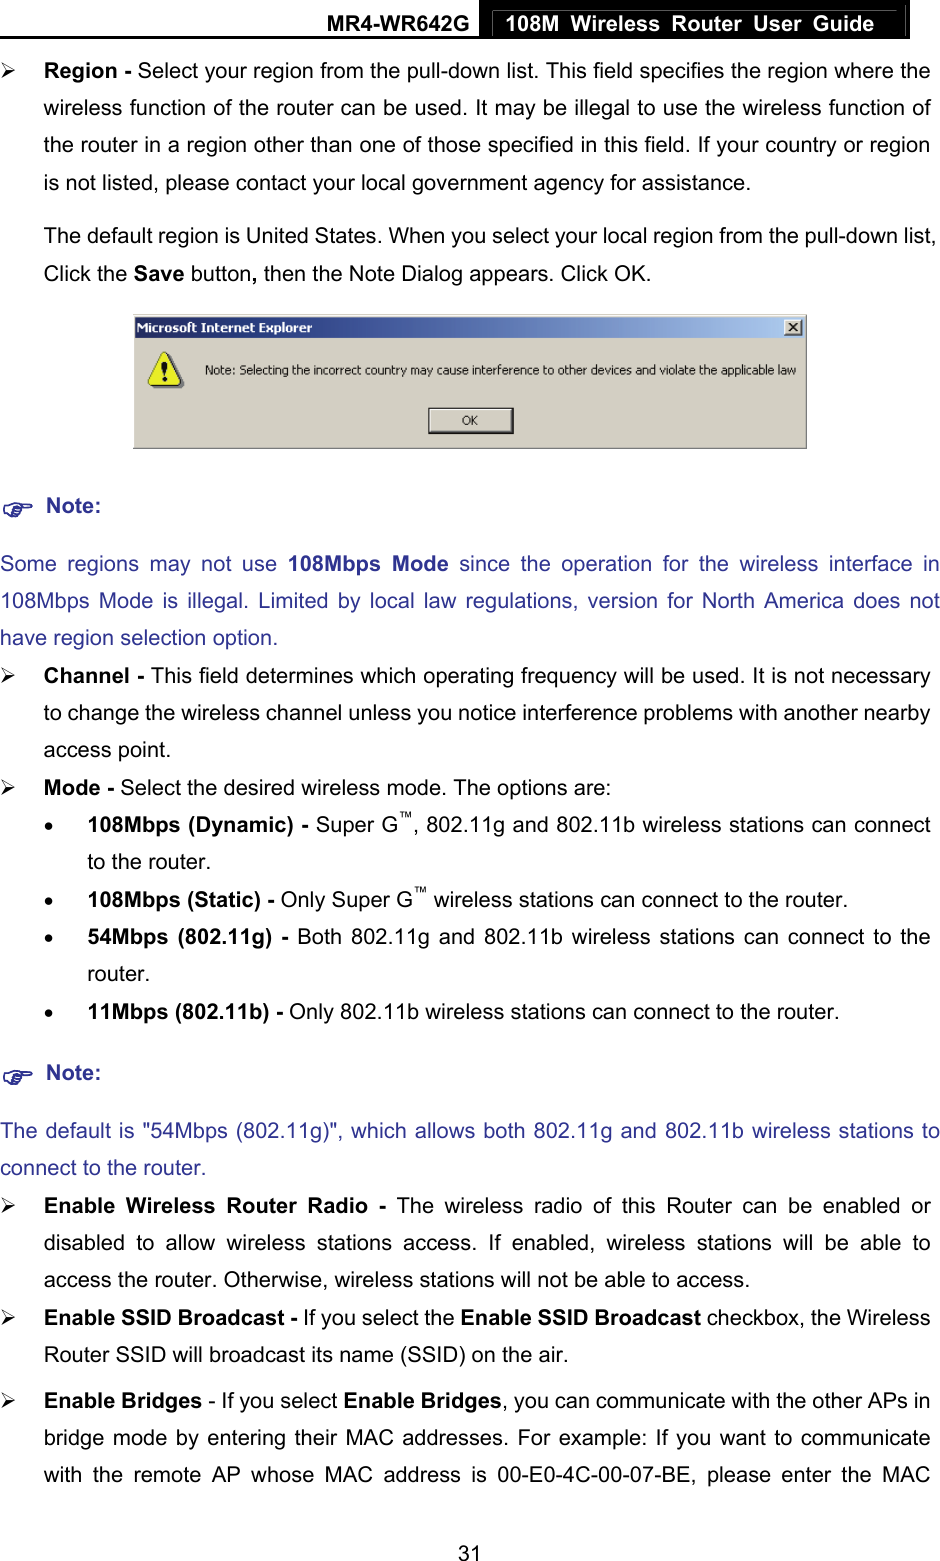 MR4-WR642G 108M Wireless Router User Guide   31¾ Region - Select your region from the pull-down list. This field specifies the region where the wireless function of the router can be used. It may be illegal to use the wireless function of the router in a region other than one of those specified in this field. If your country or region is not listed, please contact your local government agency for assistance. The default region is United States. When you select your local region from the pull-down list, Click the Save button, then the Note Dialog appears. Click OK.  ) Note: Some regions may not use 108Mbps Mode since the operation for the wireless interface in 108Mbps Mode is illegal. Limited by local law regulations, version for North America does not have region selection option. ¾ Channel - This field determines which operating frequency will be used. It is not necessary to change the wireless channel unless you notice interference problems with another nearby access point. ¾ Mode - Select the desired wireless mode. The options are:   • 108Mbps (Dynamic) - Super G™, 802.11g and 802.11b wireless stations can connect to the router. • 108Mbps (Static) - Only Super G™ wireless stations can connect to the router. • 54Mbps (802.11g) - Both 802.11g and 802.11b wireless stations can connect to the router. • 11Mbps (802.11b) - Only 802.11b wireless stations can connect to the router. ) Note: The default is &quot;54Mbps (802.11g)&quot;, which allows both 802.11g and 802.11b wireless stations to connect to the router. ¾ Enable Wireless Router Radio - The wireless radio of this Router can be enabled or disabled to allow wireless stations access. If enabled, wireless stations will be able to access the router. Otherwise, wireless stations will not be able to access. ¾ Enable SSID Broadcast - If you select the Enable SSID Broadcast checkbox, the Wireless Router SSID will broadcast its name (SSID) on the air. ¾ Enable Bridges - If you select Enable Bridges, you can communicate with the other APs in bridge mode by entering their MAC addresses. For example: If you want to communicate with the remote AP whose MAC address is 00-E0-4C-00-07-BE, please enter the MAC 